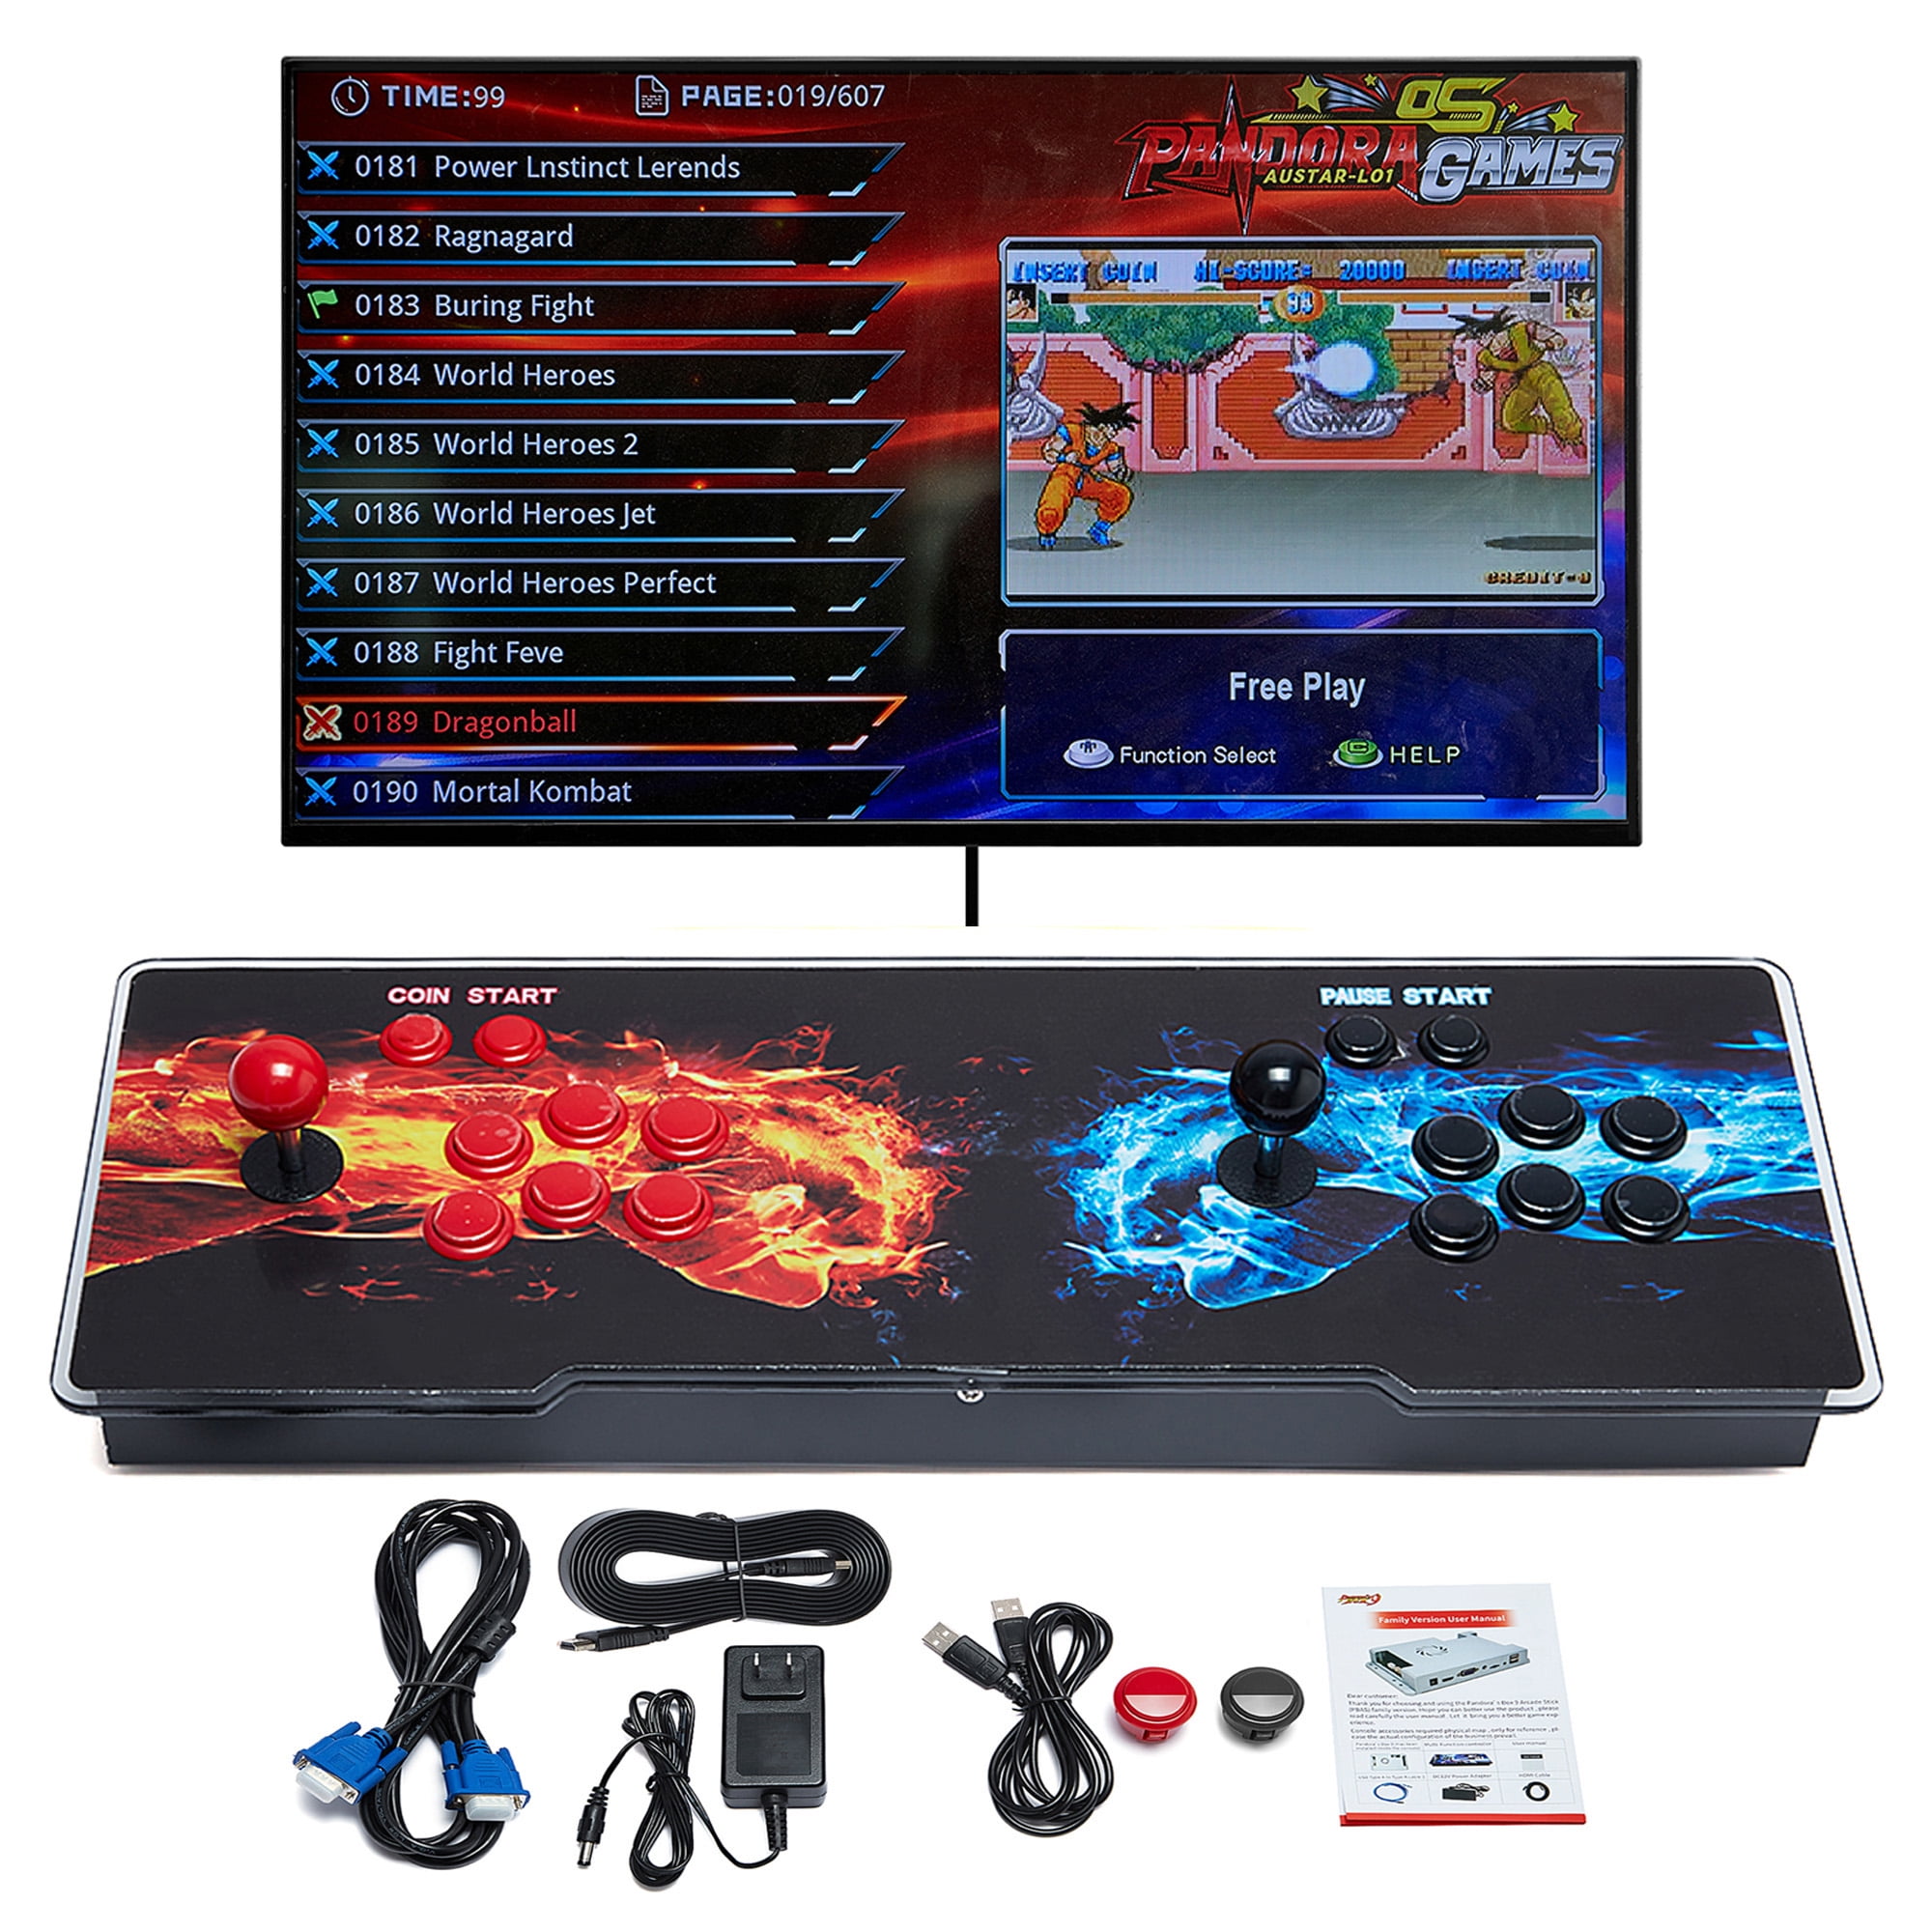 SAYFUT Retro Games 42631 IN 1, Pandora's Box 12s Arcade Game Console -  Double Joystick HD Arcade Games Machines for Home Online Games Console 